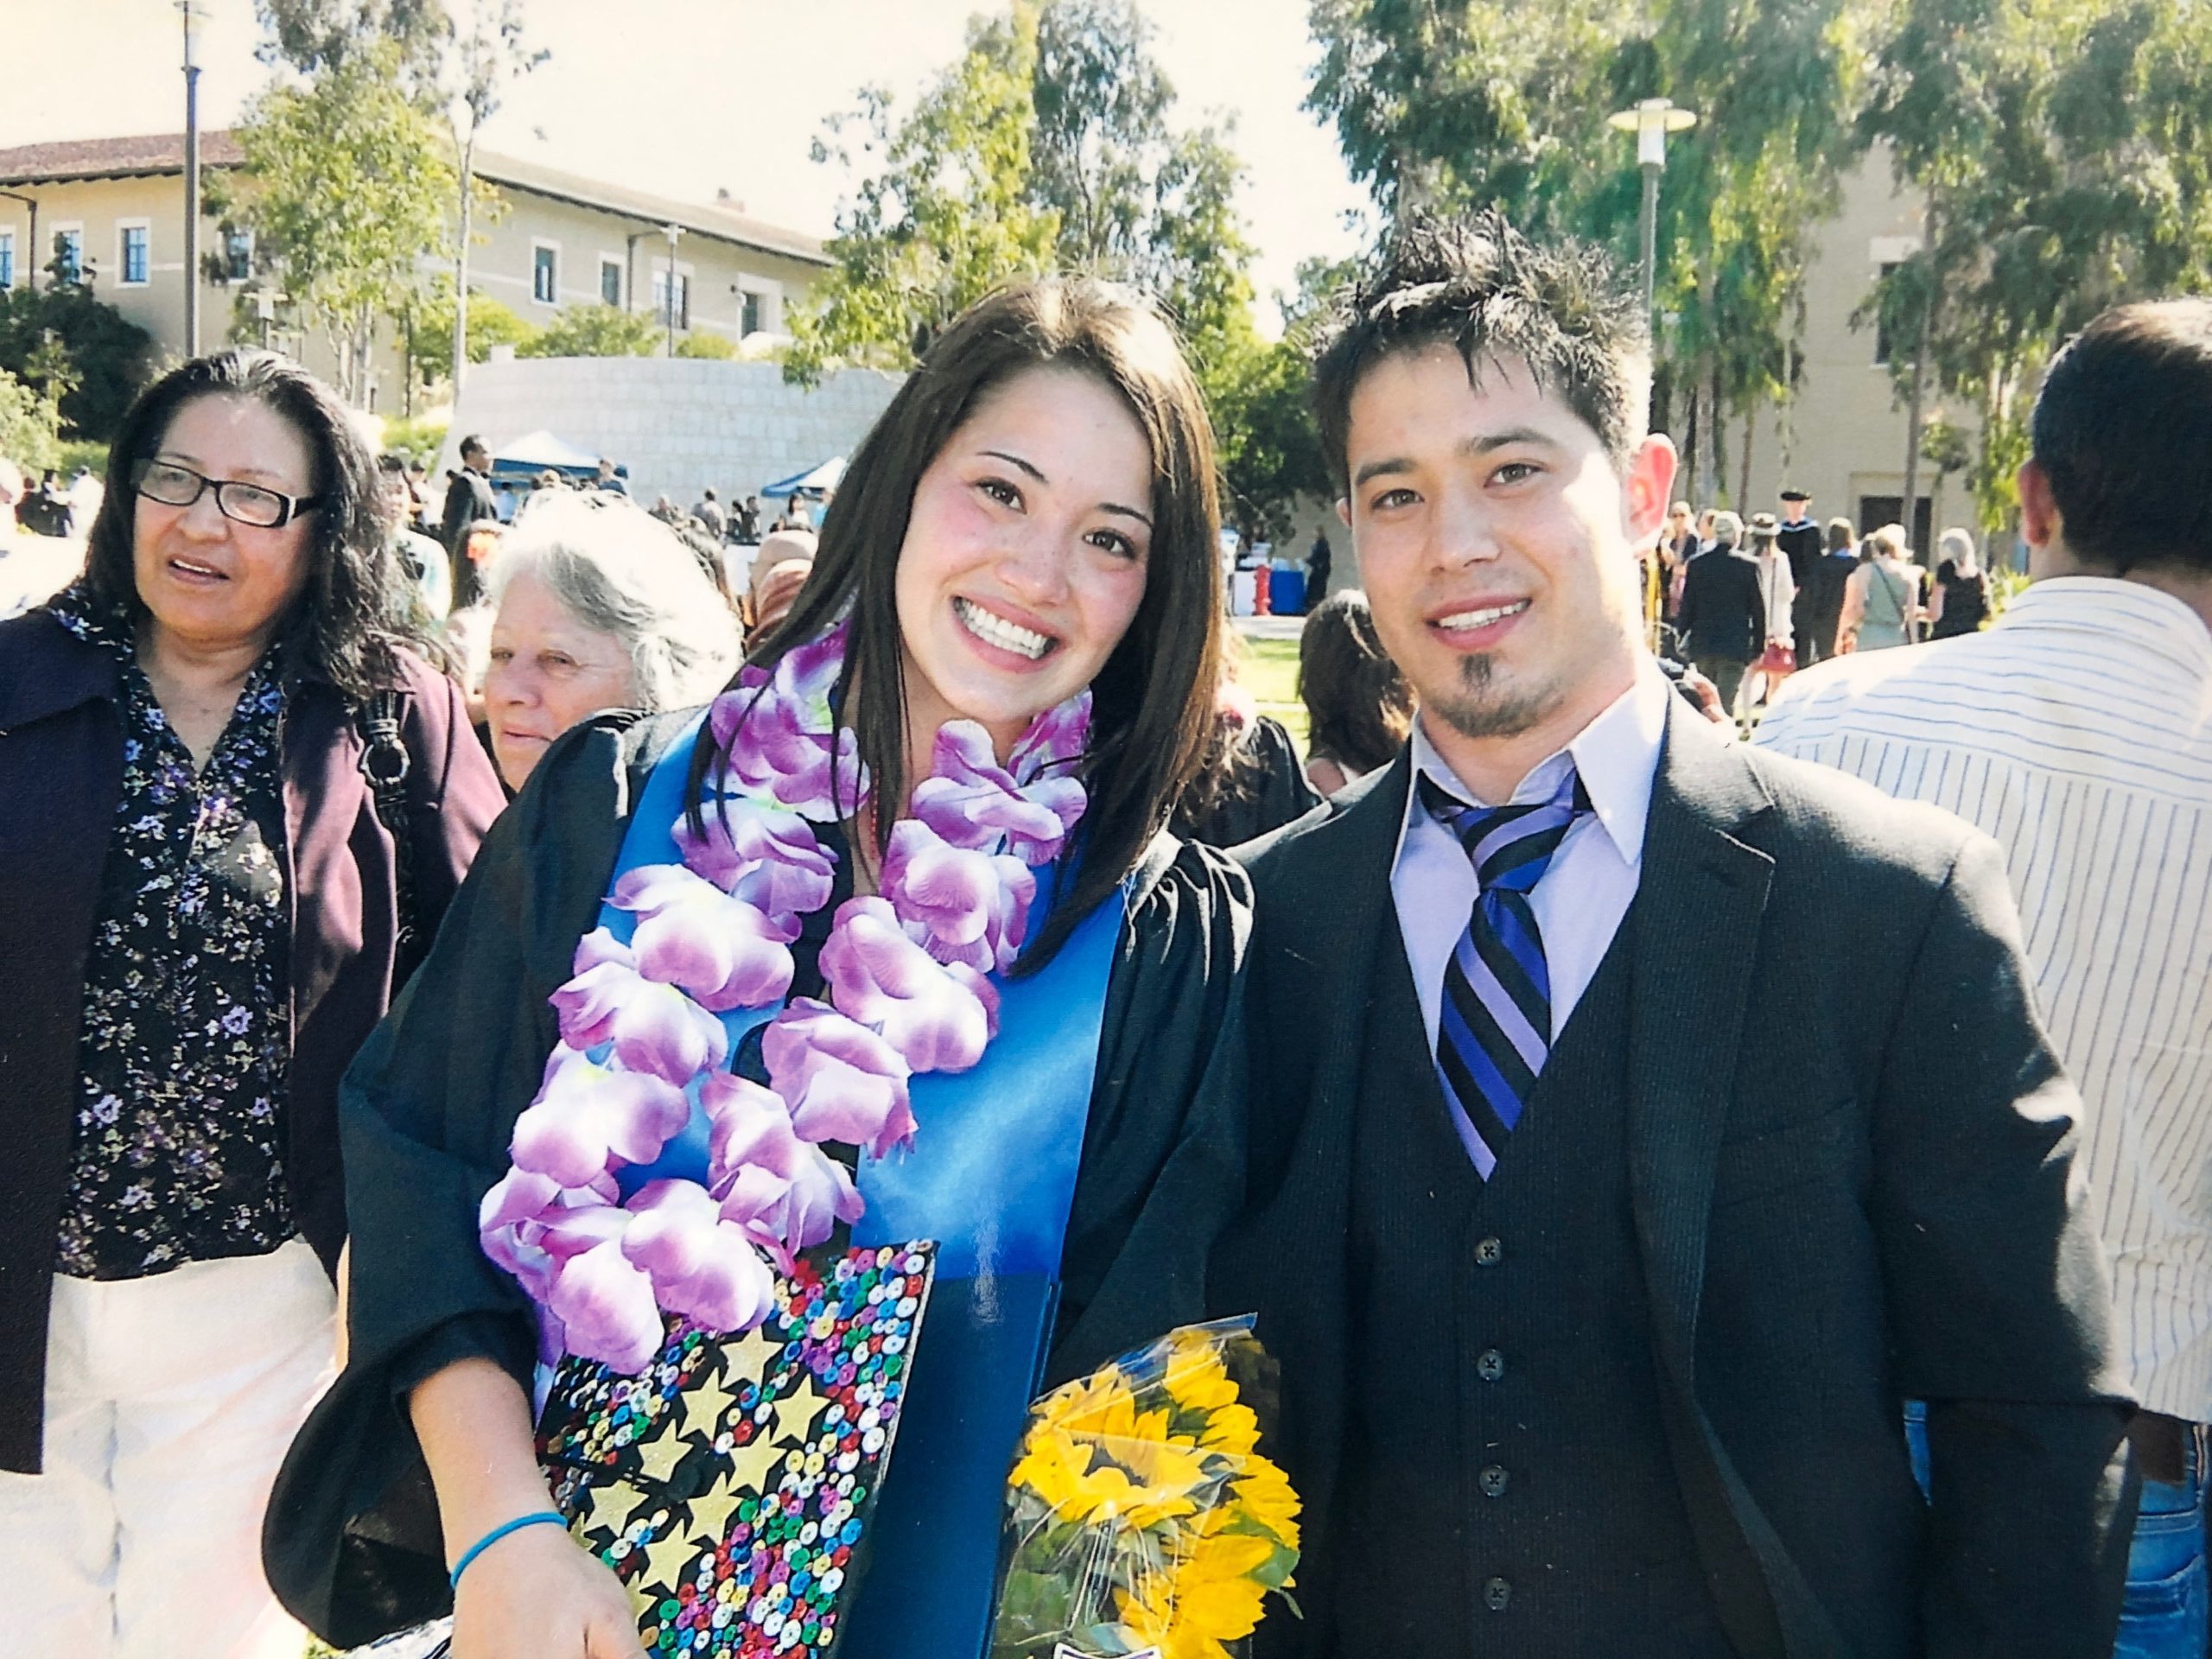 (Left to right) Jenny with her brother Shane at her University graduation from her dream school, Soka University of America.